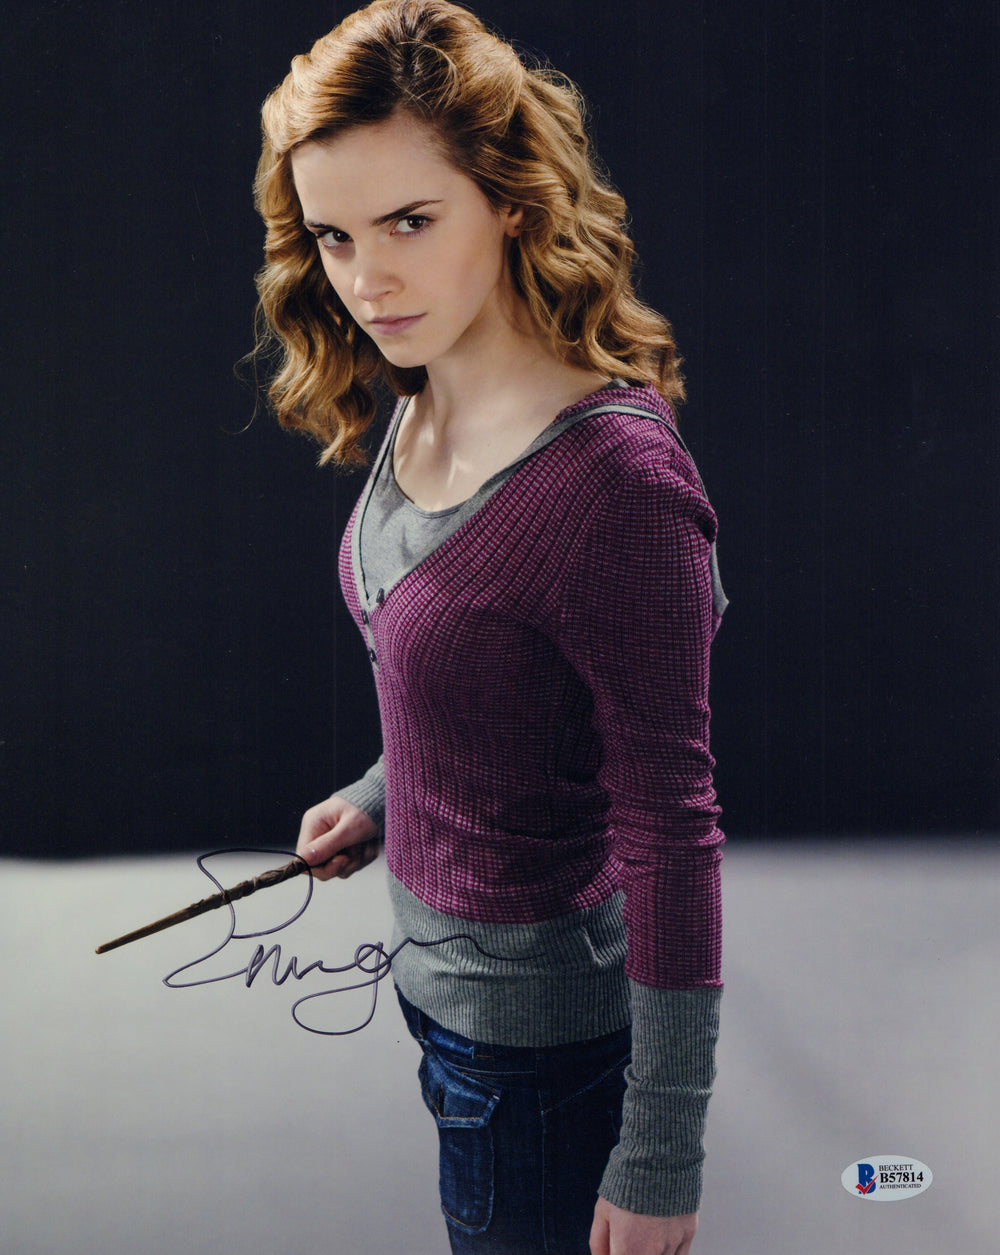 Emma Watson as Hermione Granger from Harry Potter Signed 11x14 Photo